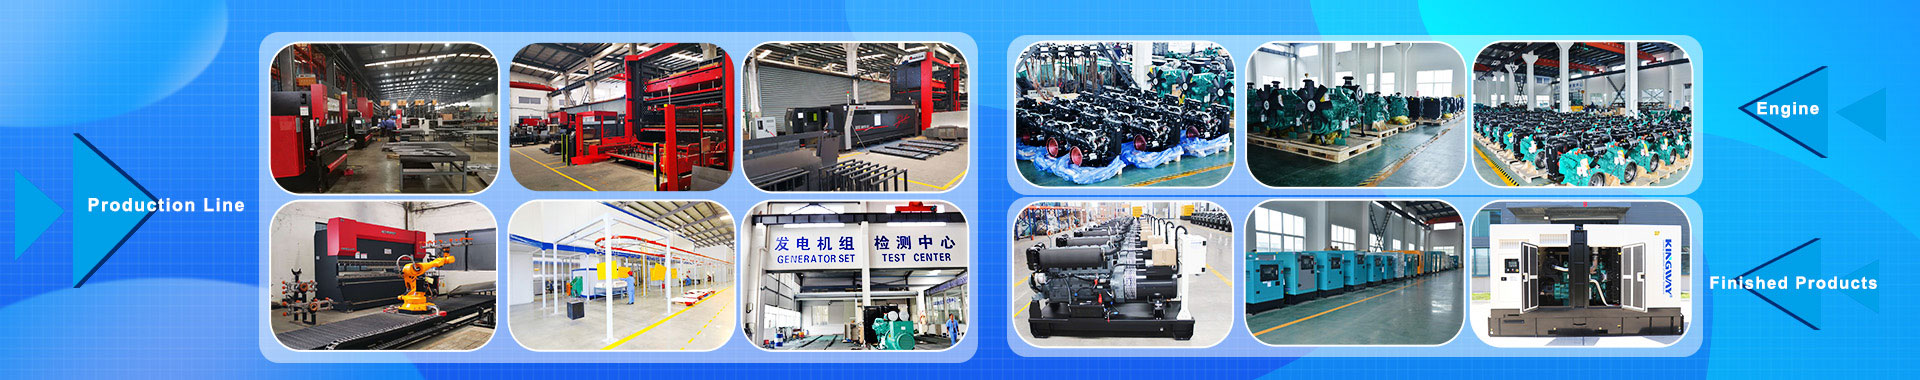 The Leading Diesel Generator,Gas Generator, Zone 2 Equipment Manufacturer in China